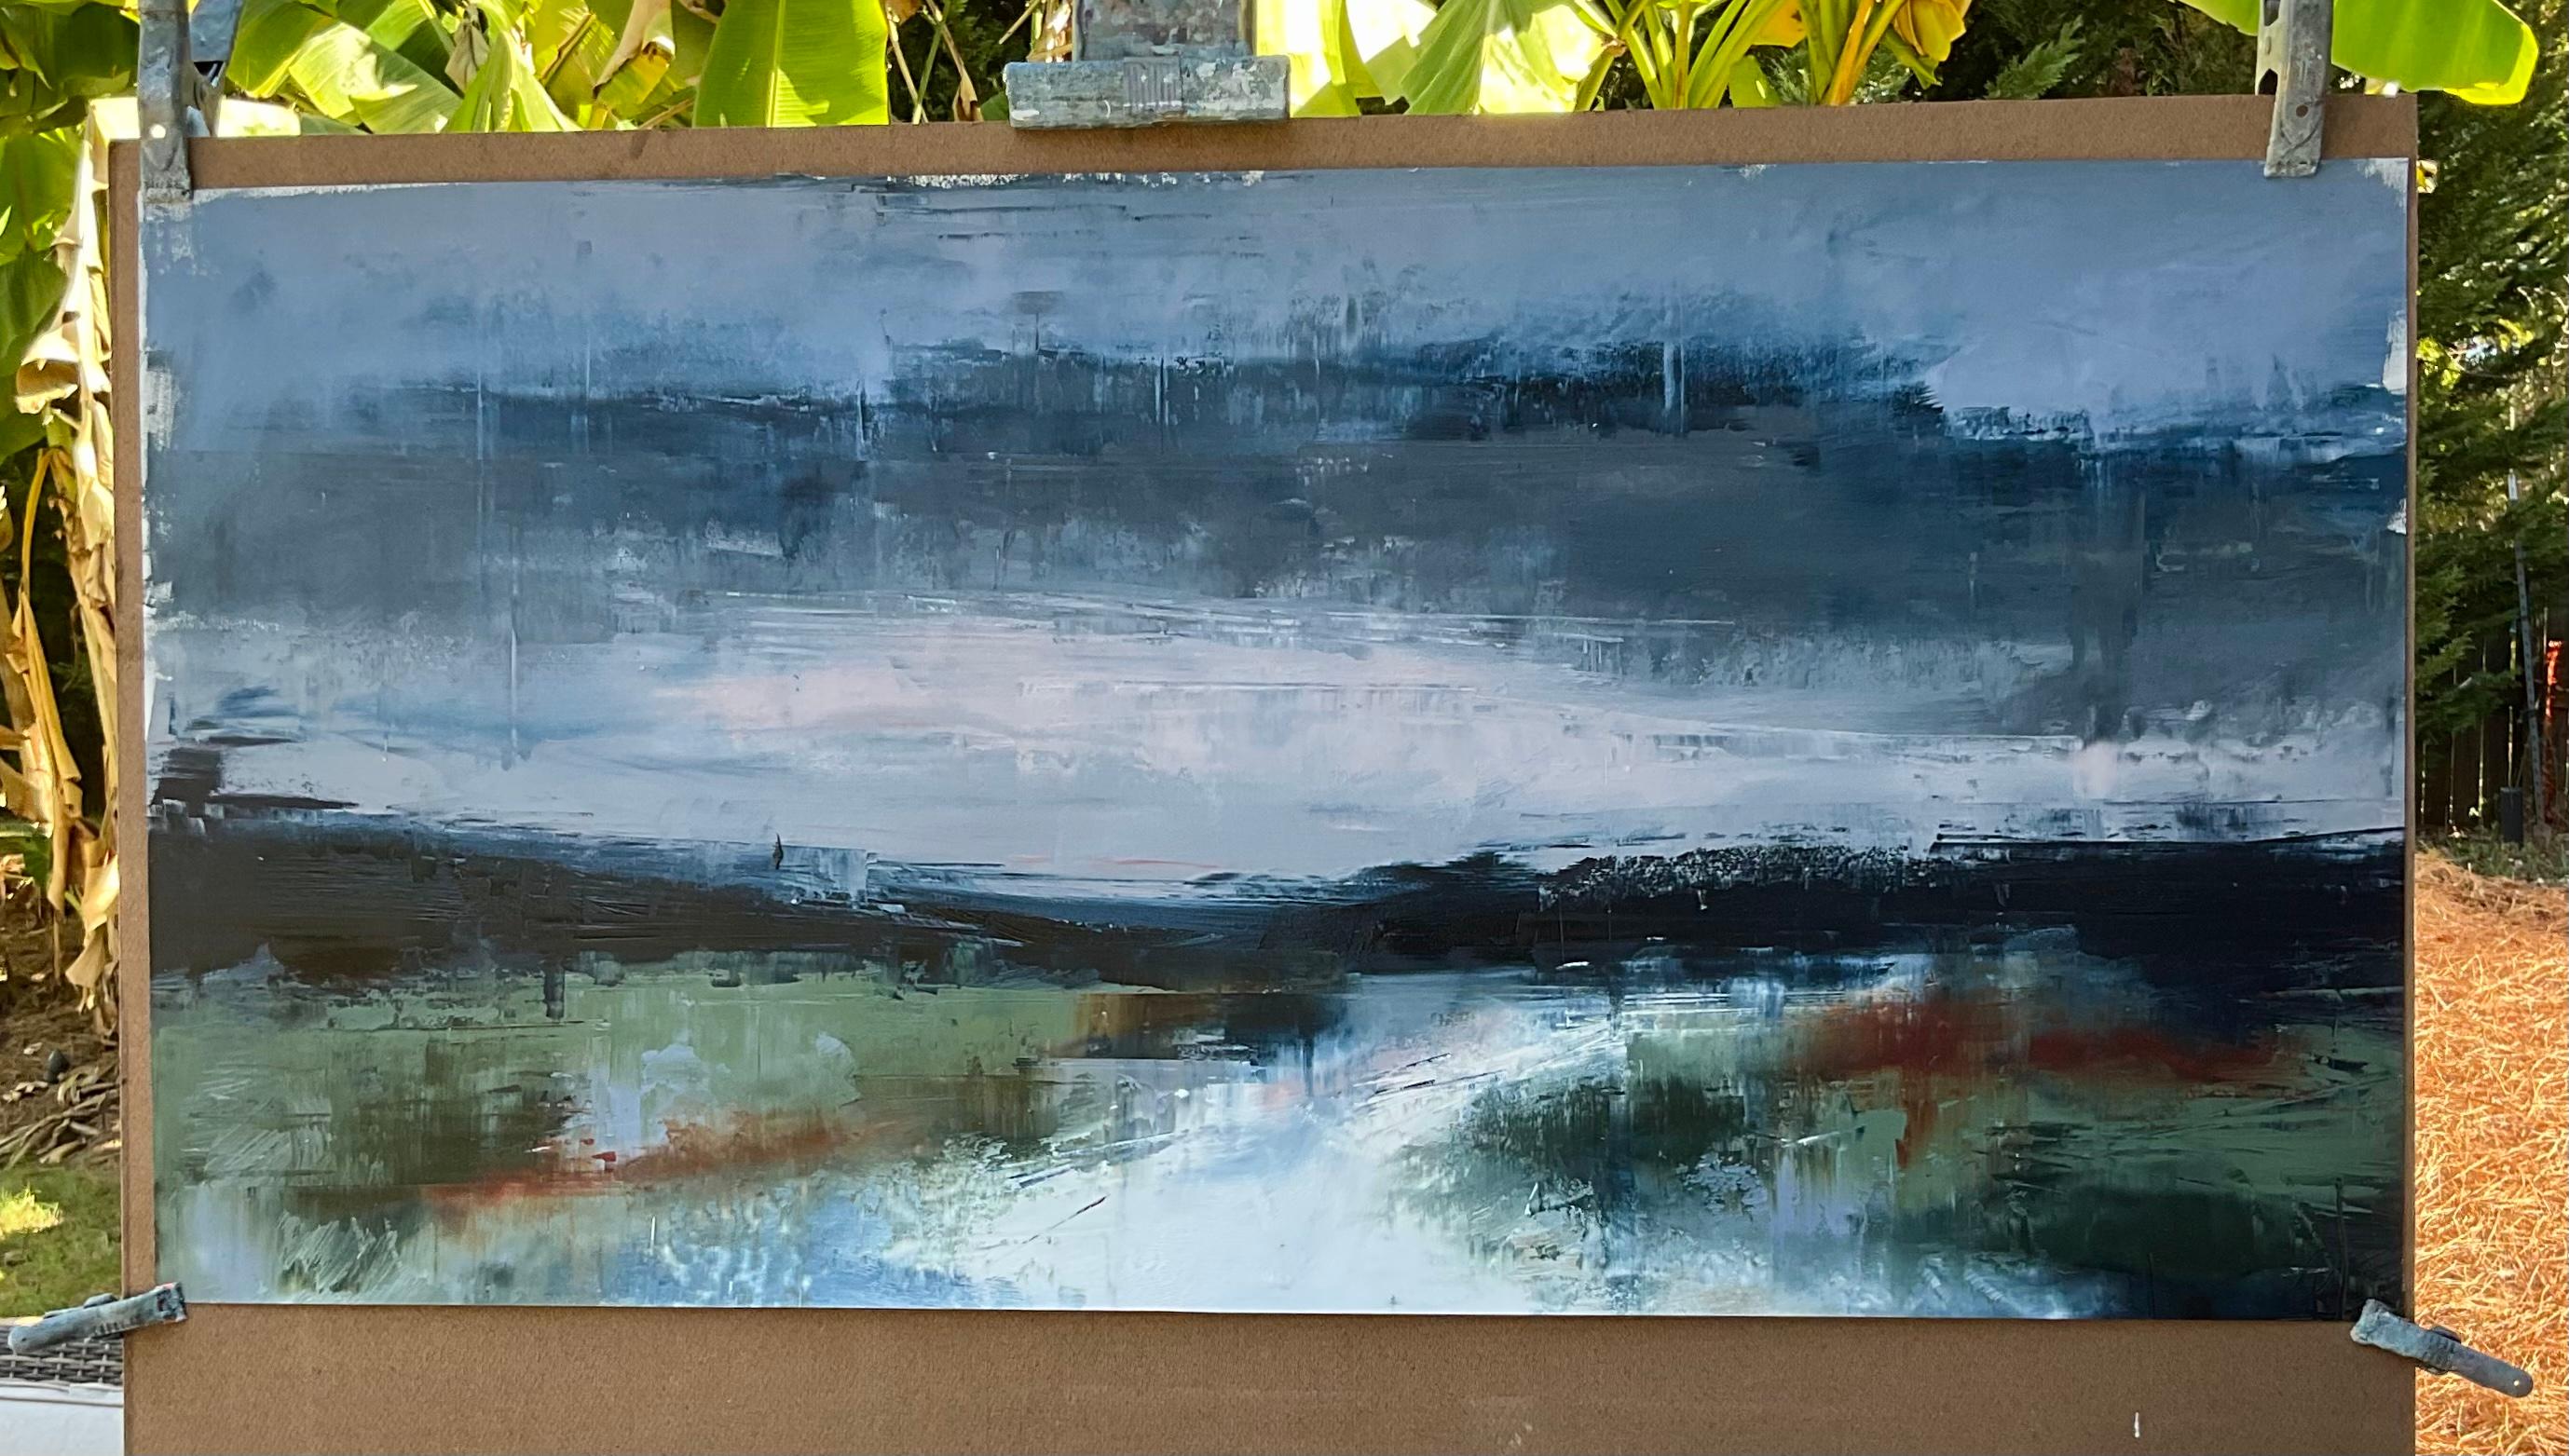 <p>Artist Comments<br>Artist Ronda Waiksnis demonstrates a moody and evocative abstract view. Combinations of grays, earthy greens, and midnight blue shape a river winding through the grassy terrain. Ronda provides minimal representation but